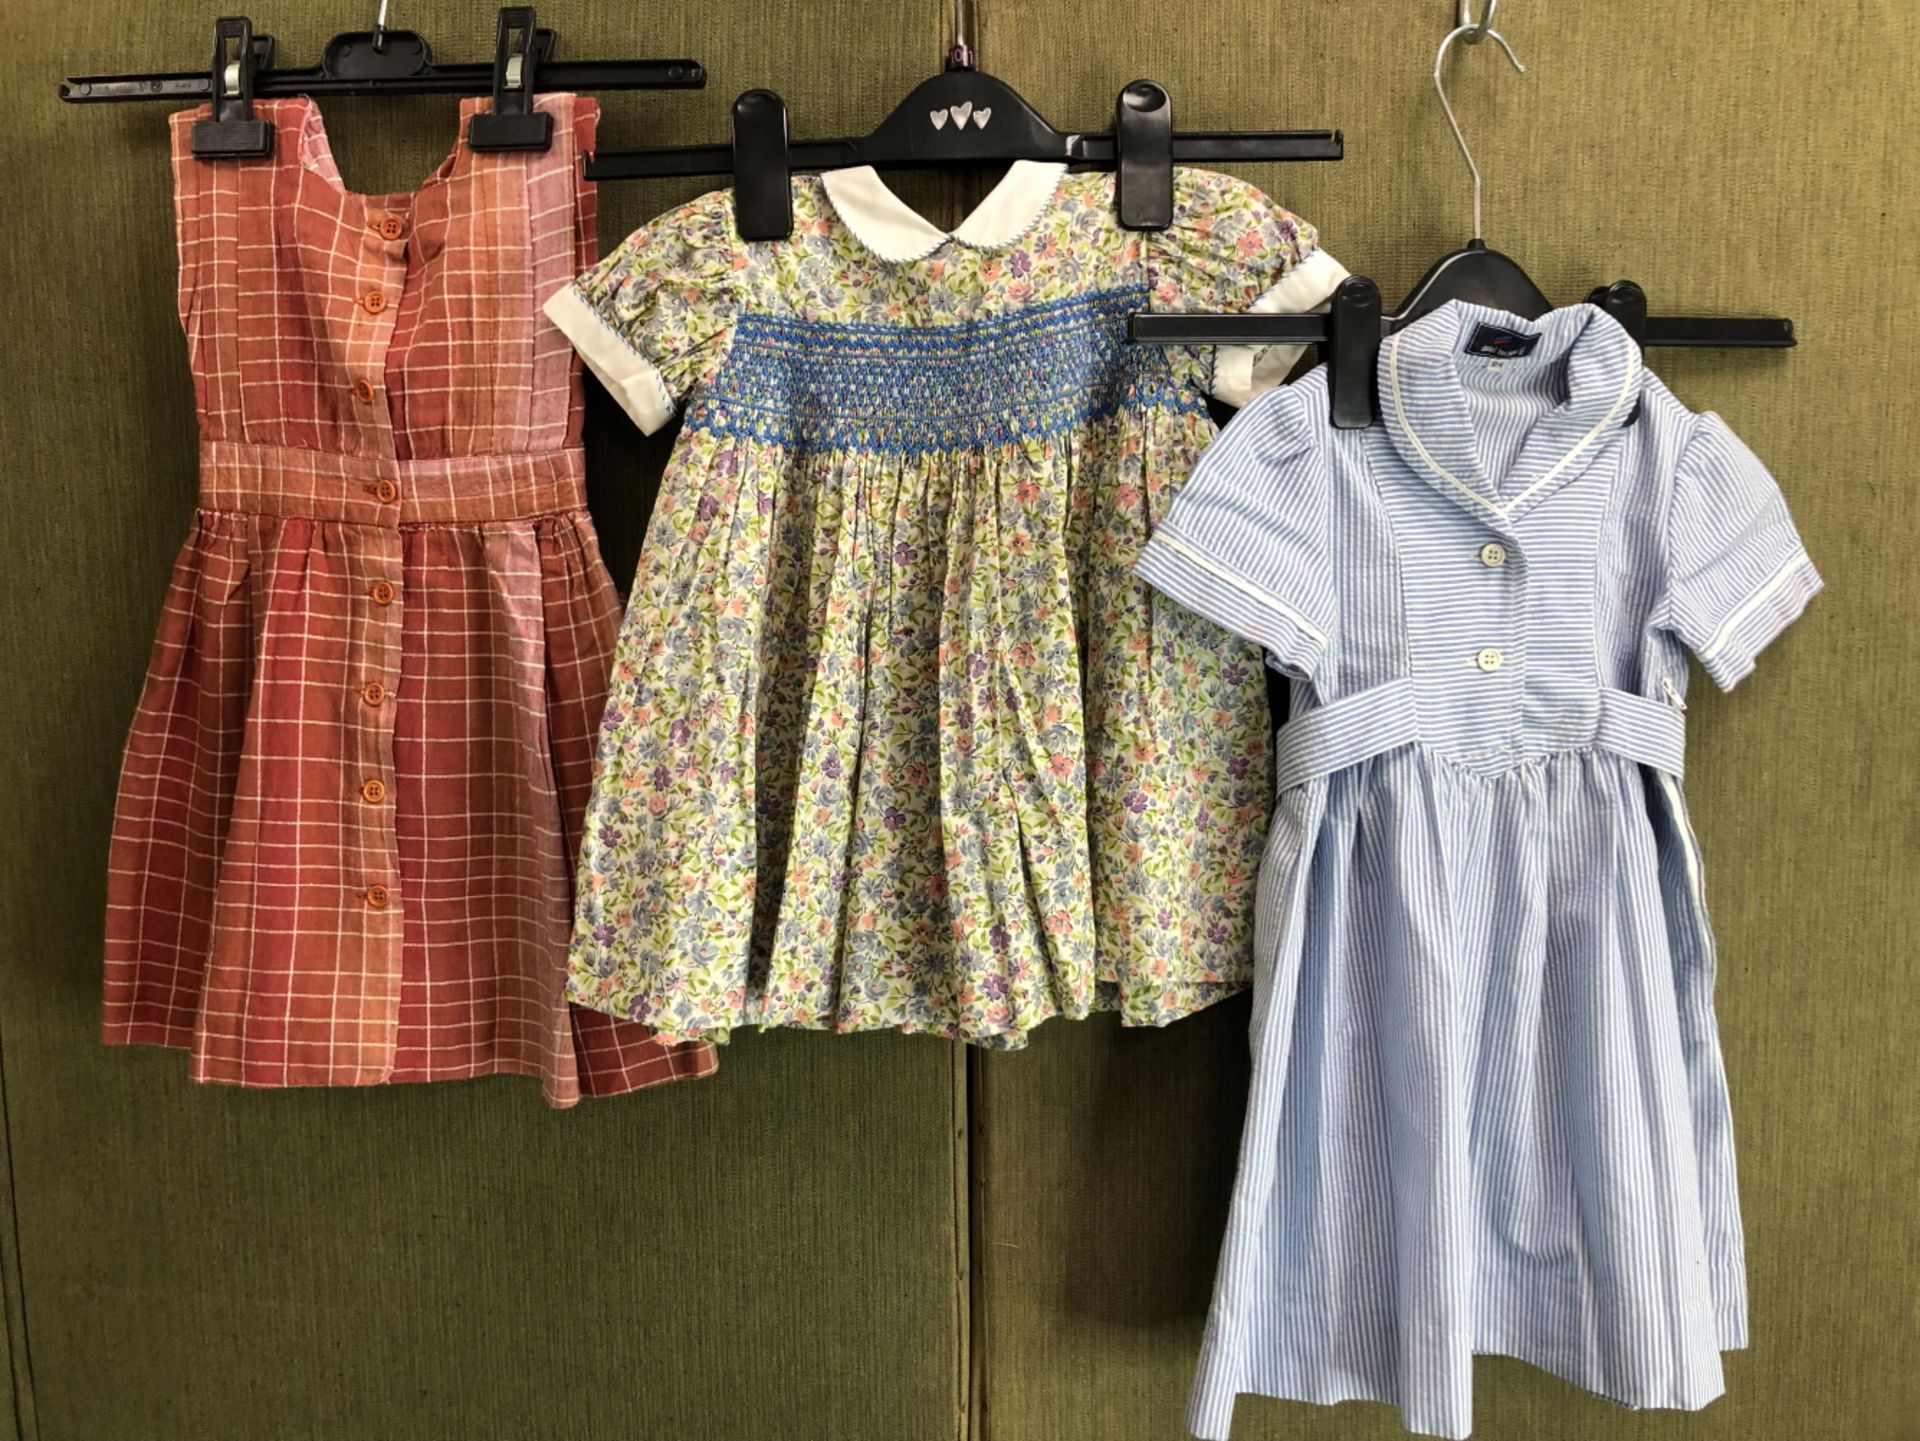 A LIBERTY OF LONDON SMOCKED CHILD'S DRESS, TOGETHER WITH TWO DANIEL HECHTER DRESSES (3)